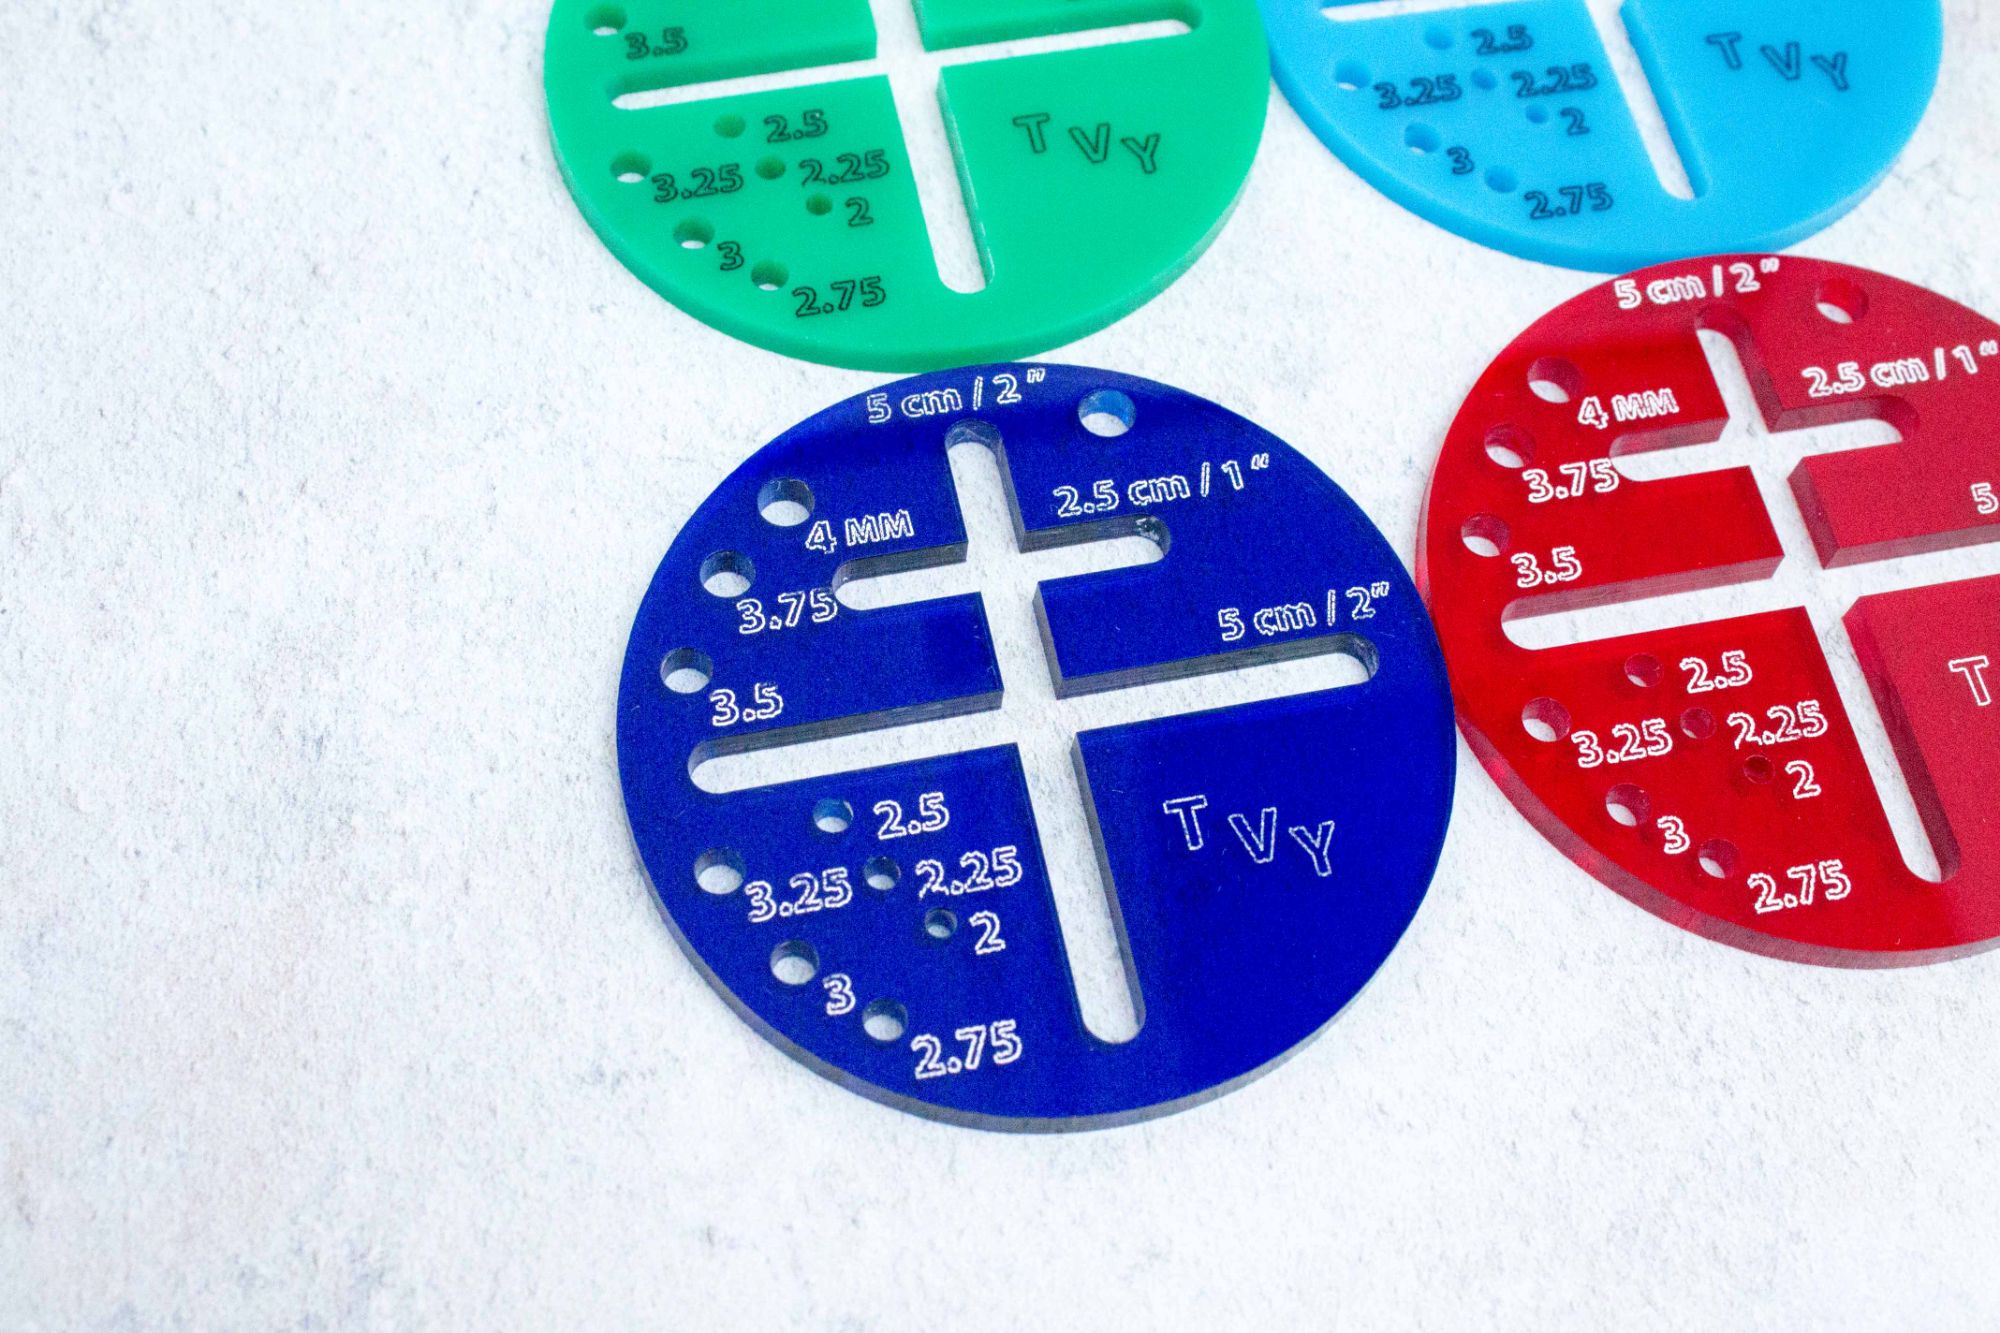 acrylic circular gauges with 2 inch and 1 inch crosses in the middle and holes for needle sizing up to 4mm